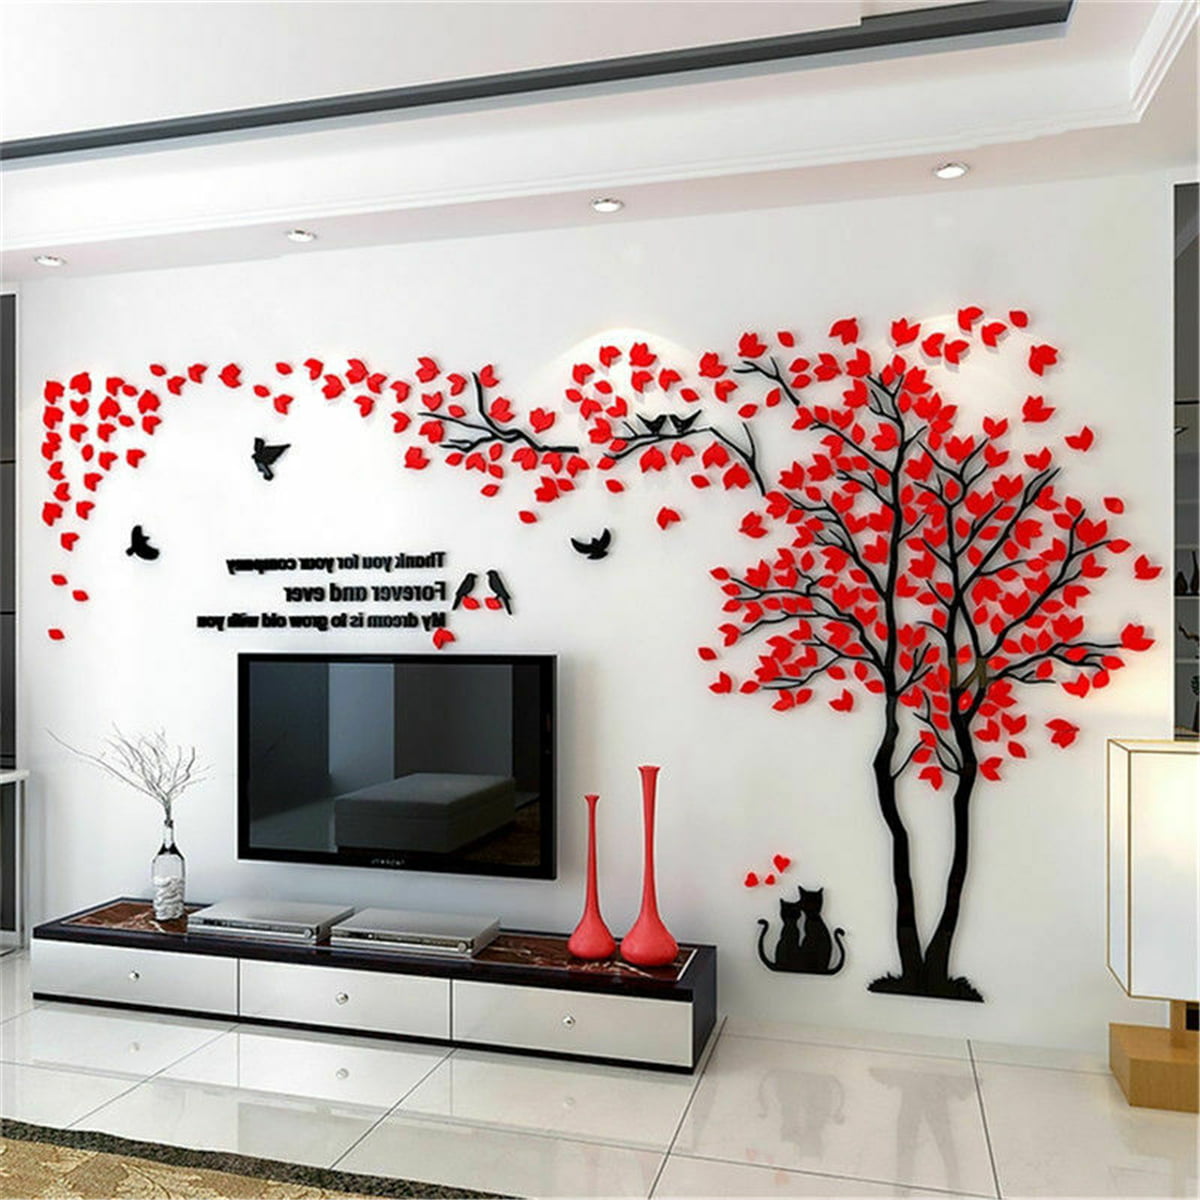 Large Tree Arcylic Wall 3D Sticker Living Room Decal Mural Art DIY Home TV Decor 